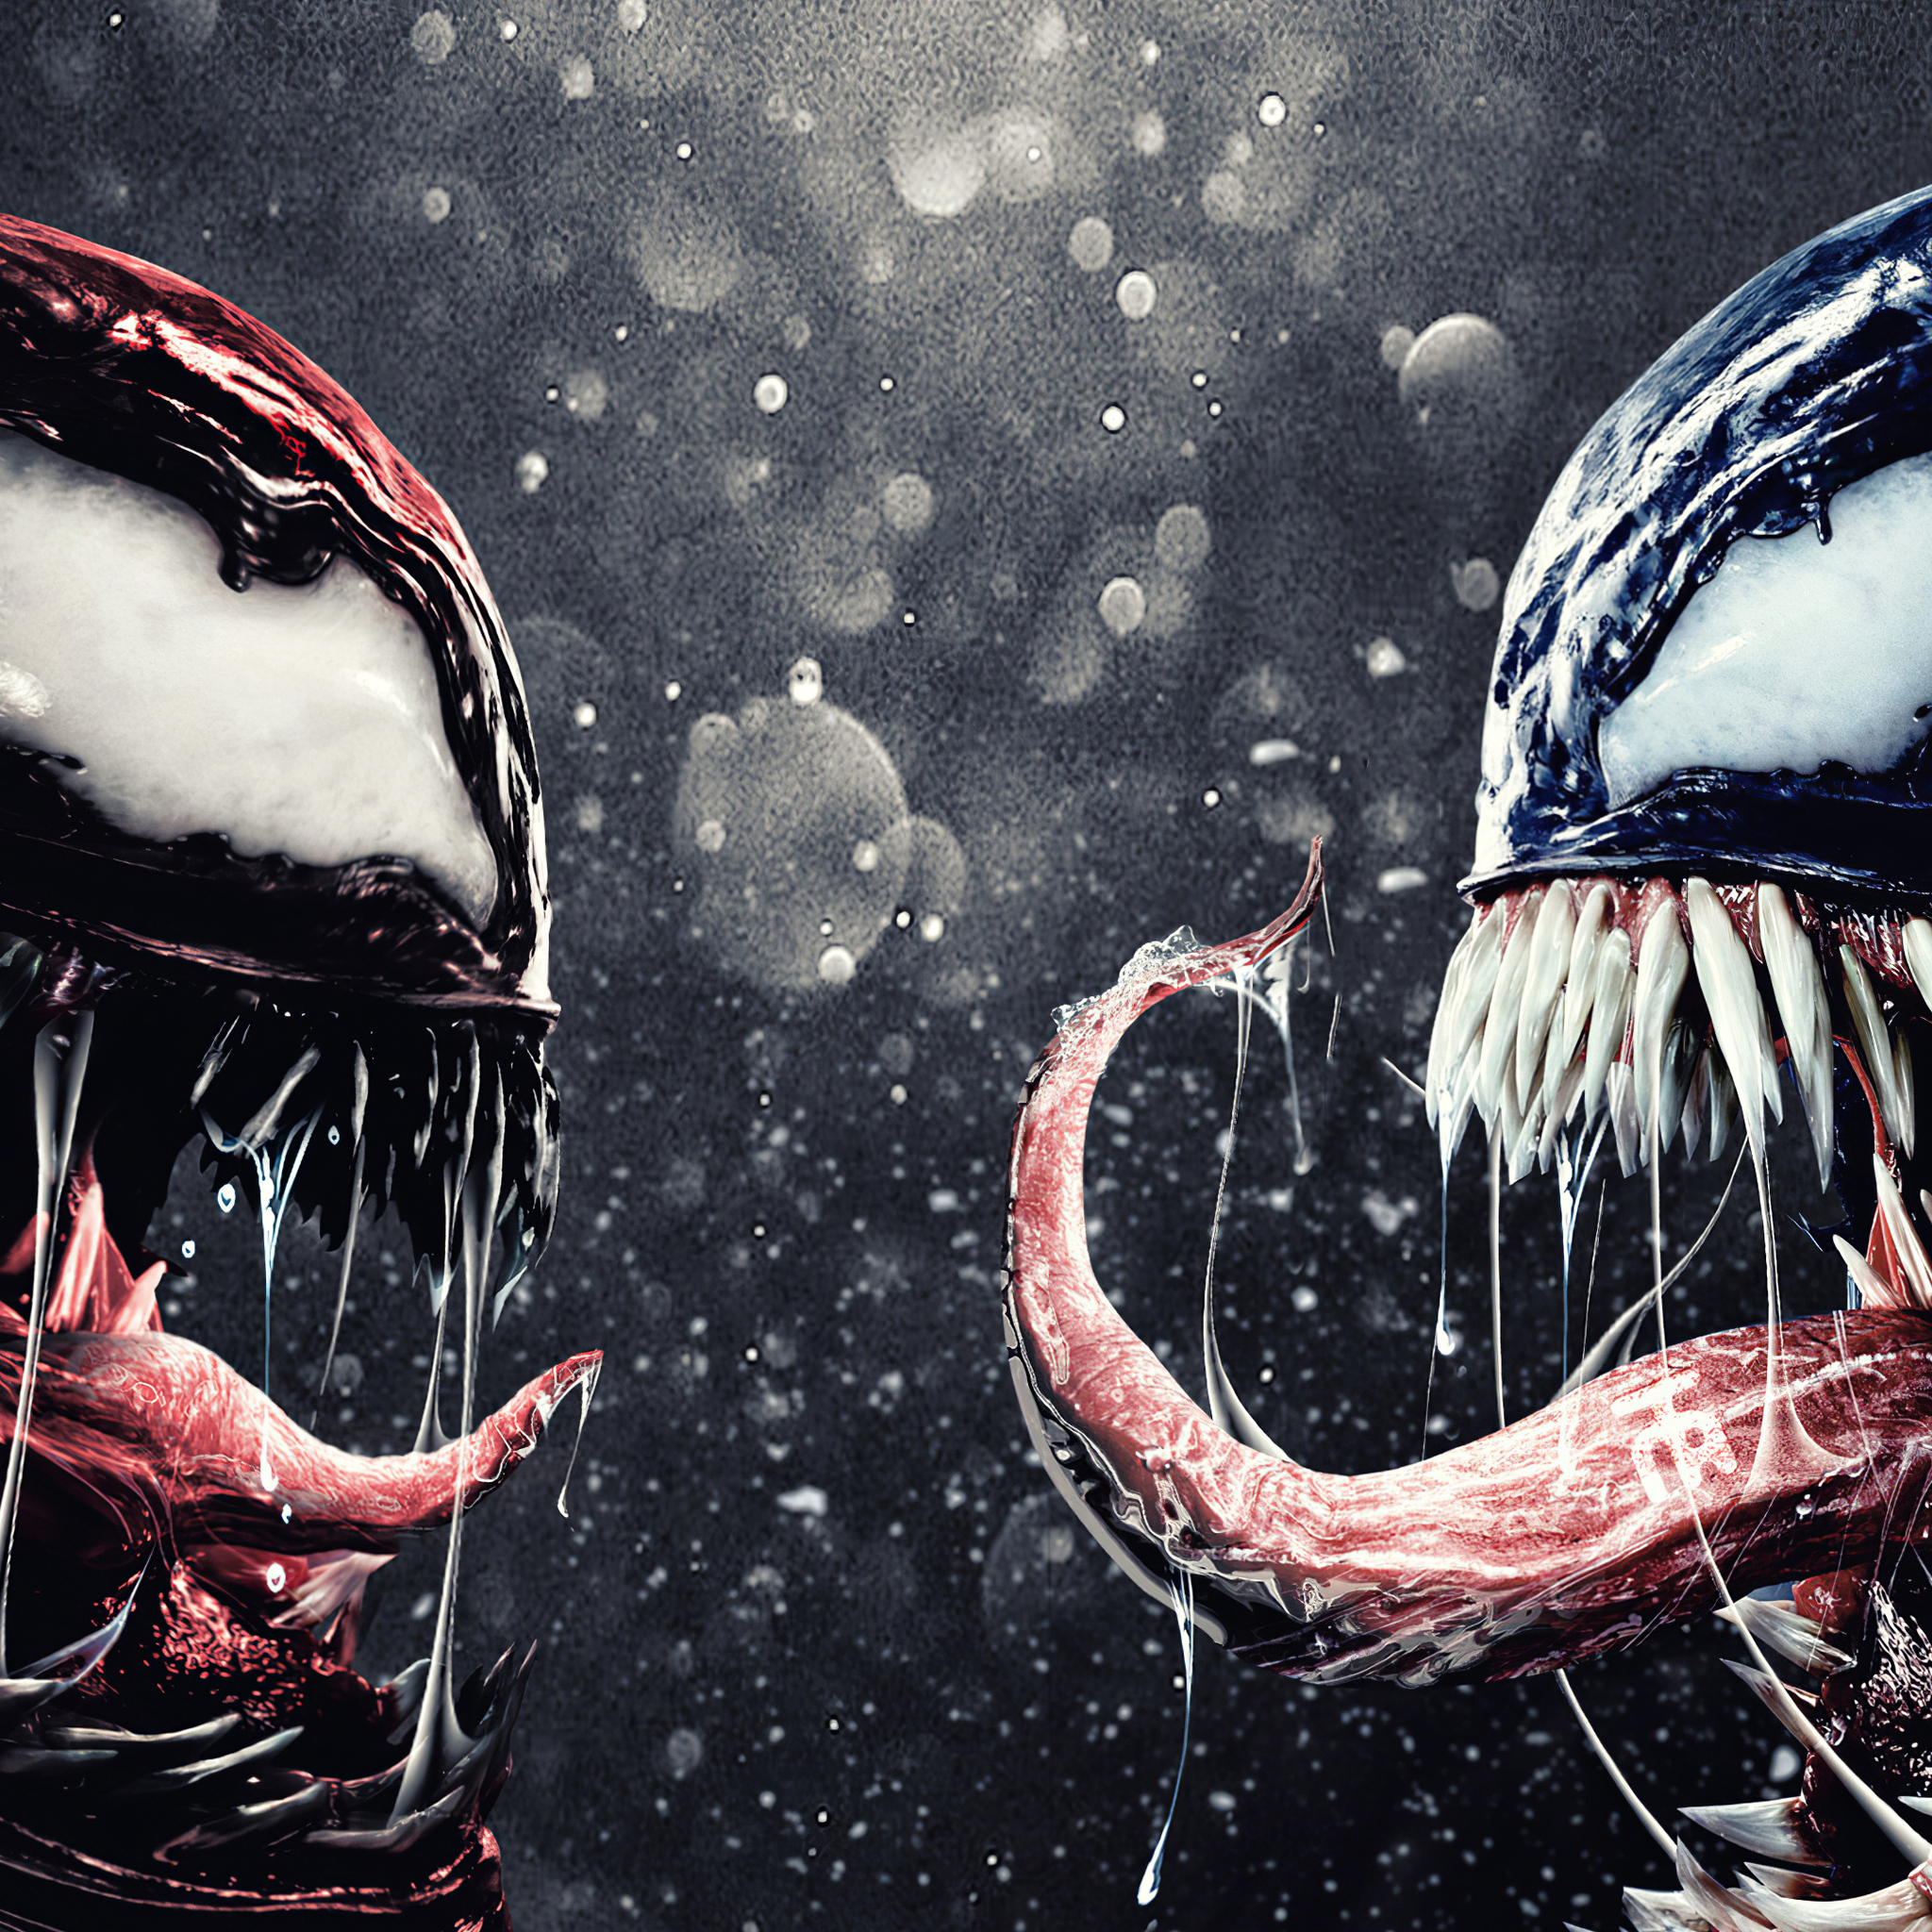 X venom v carnage ipad air hd k wallpapers images backgrounds photos and pictures